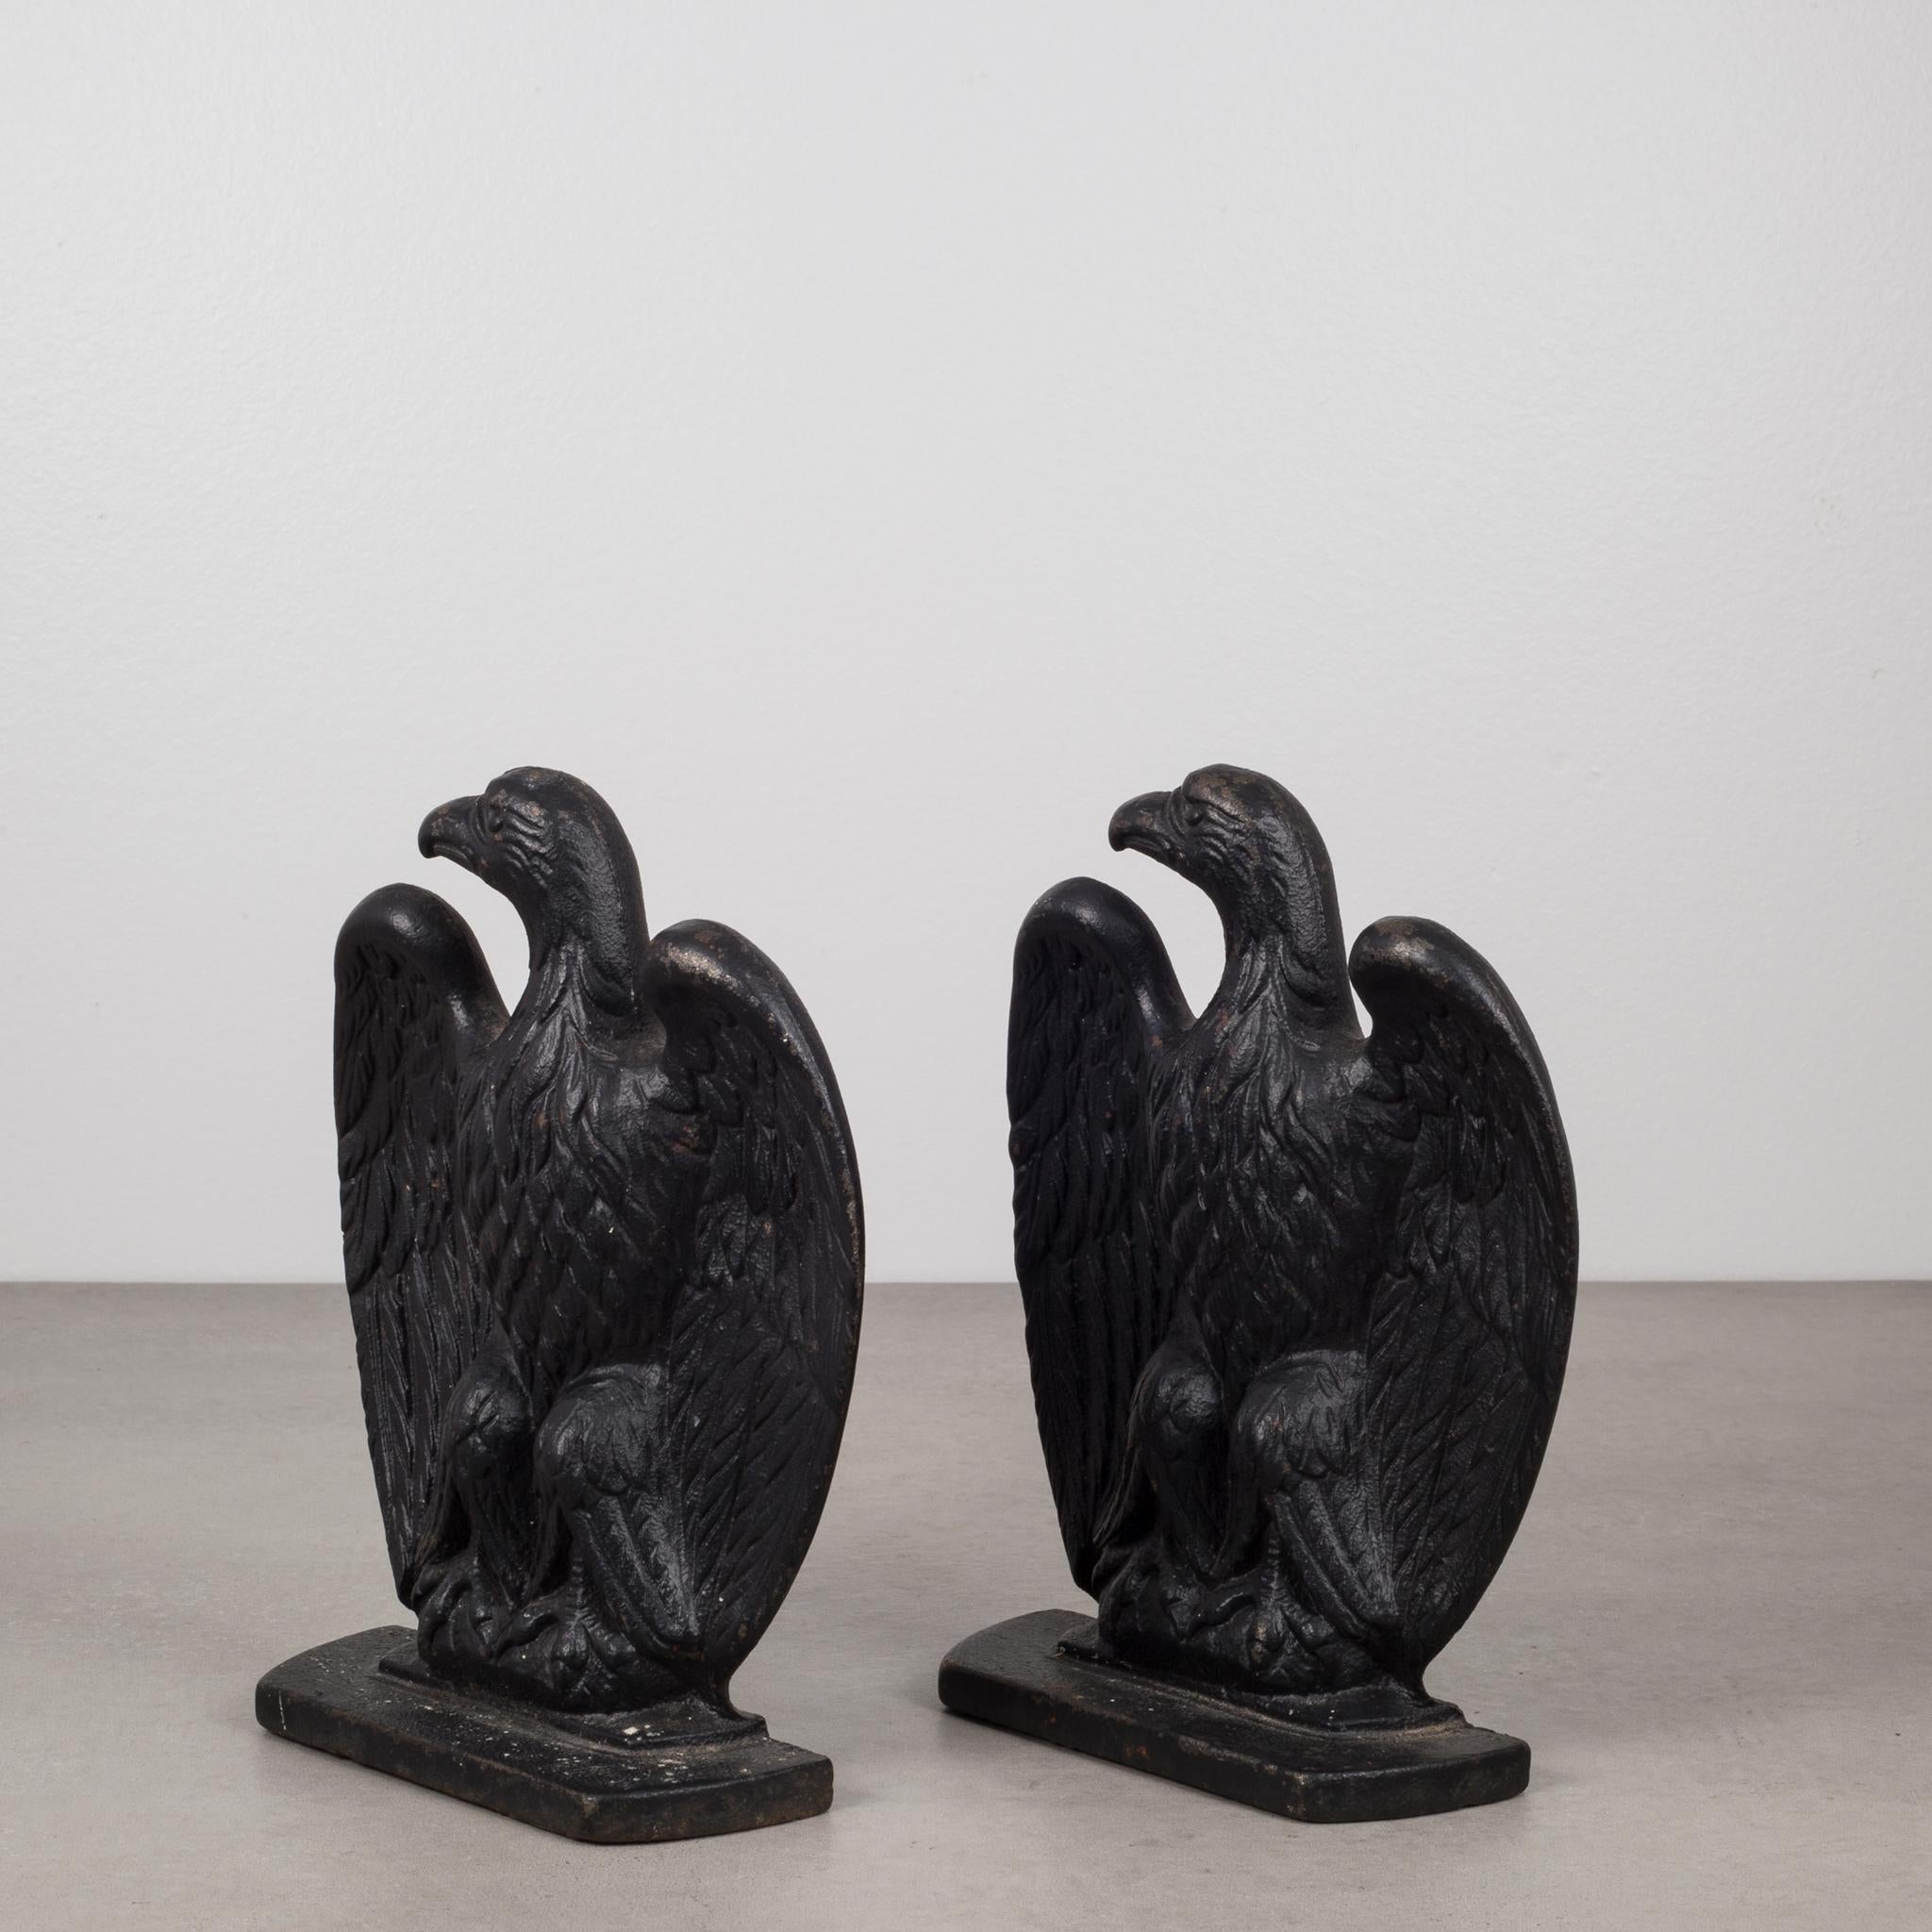 ABOUT

This is an original pair of cast iron American Eagle bookends manufactured by Robert Emig in Pennsylvania, USA. Both pieces have retained their original painted finish and are in excellent condition with appropriate patina for their age.